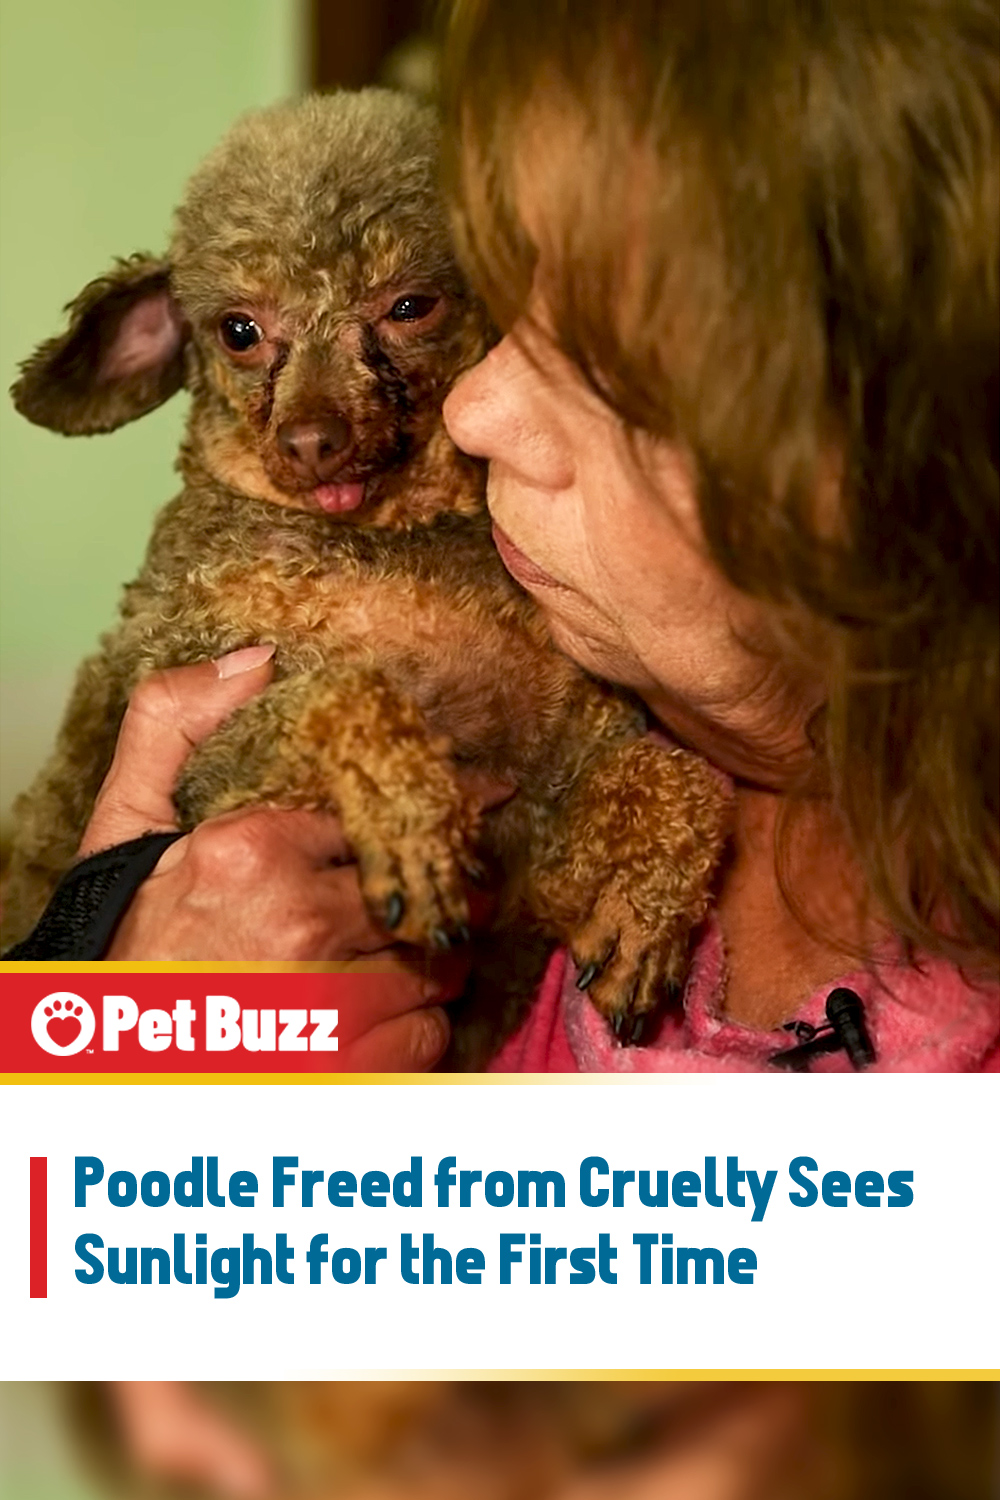 Poodle Freed from Cruelty Sees Sunlight for the First Time